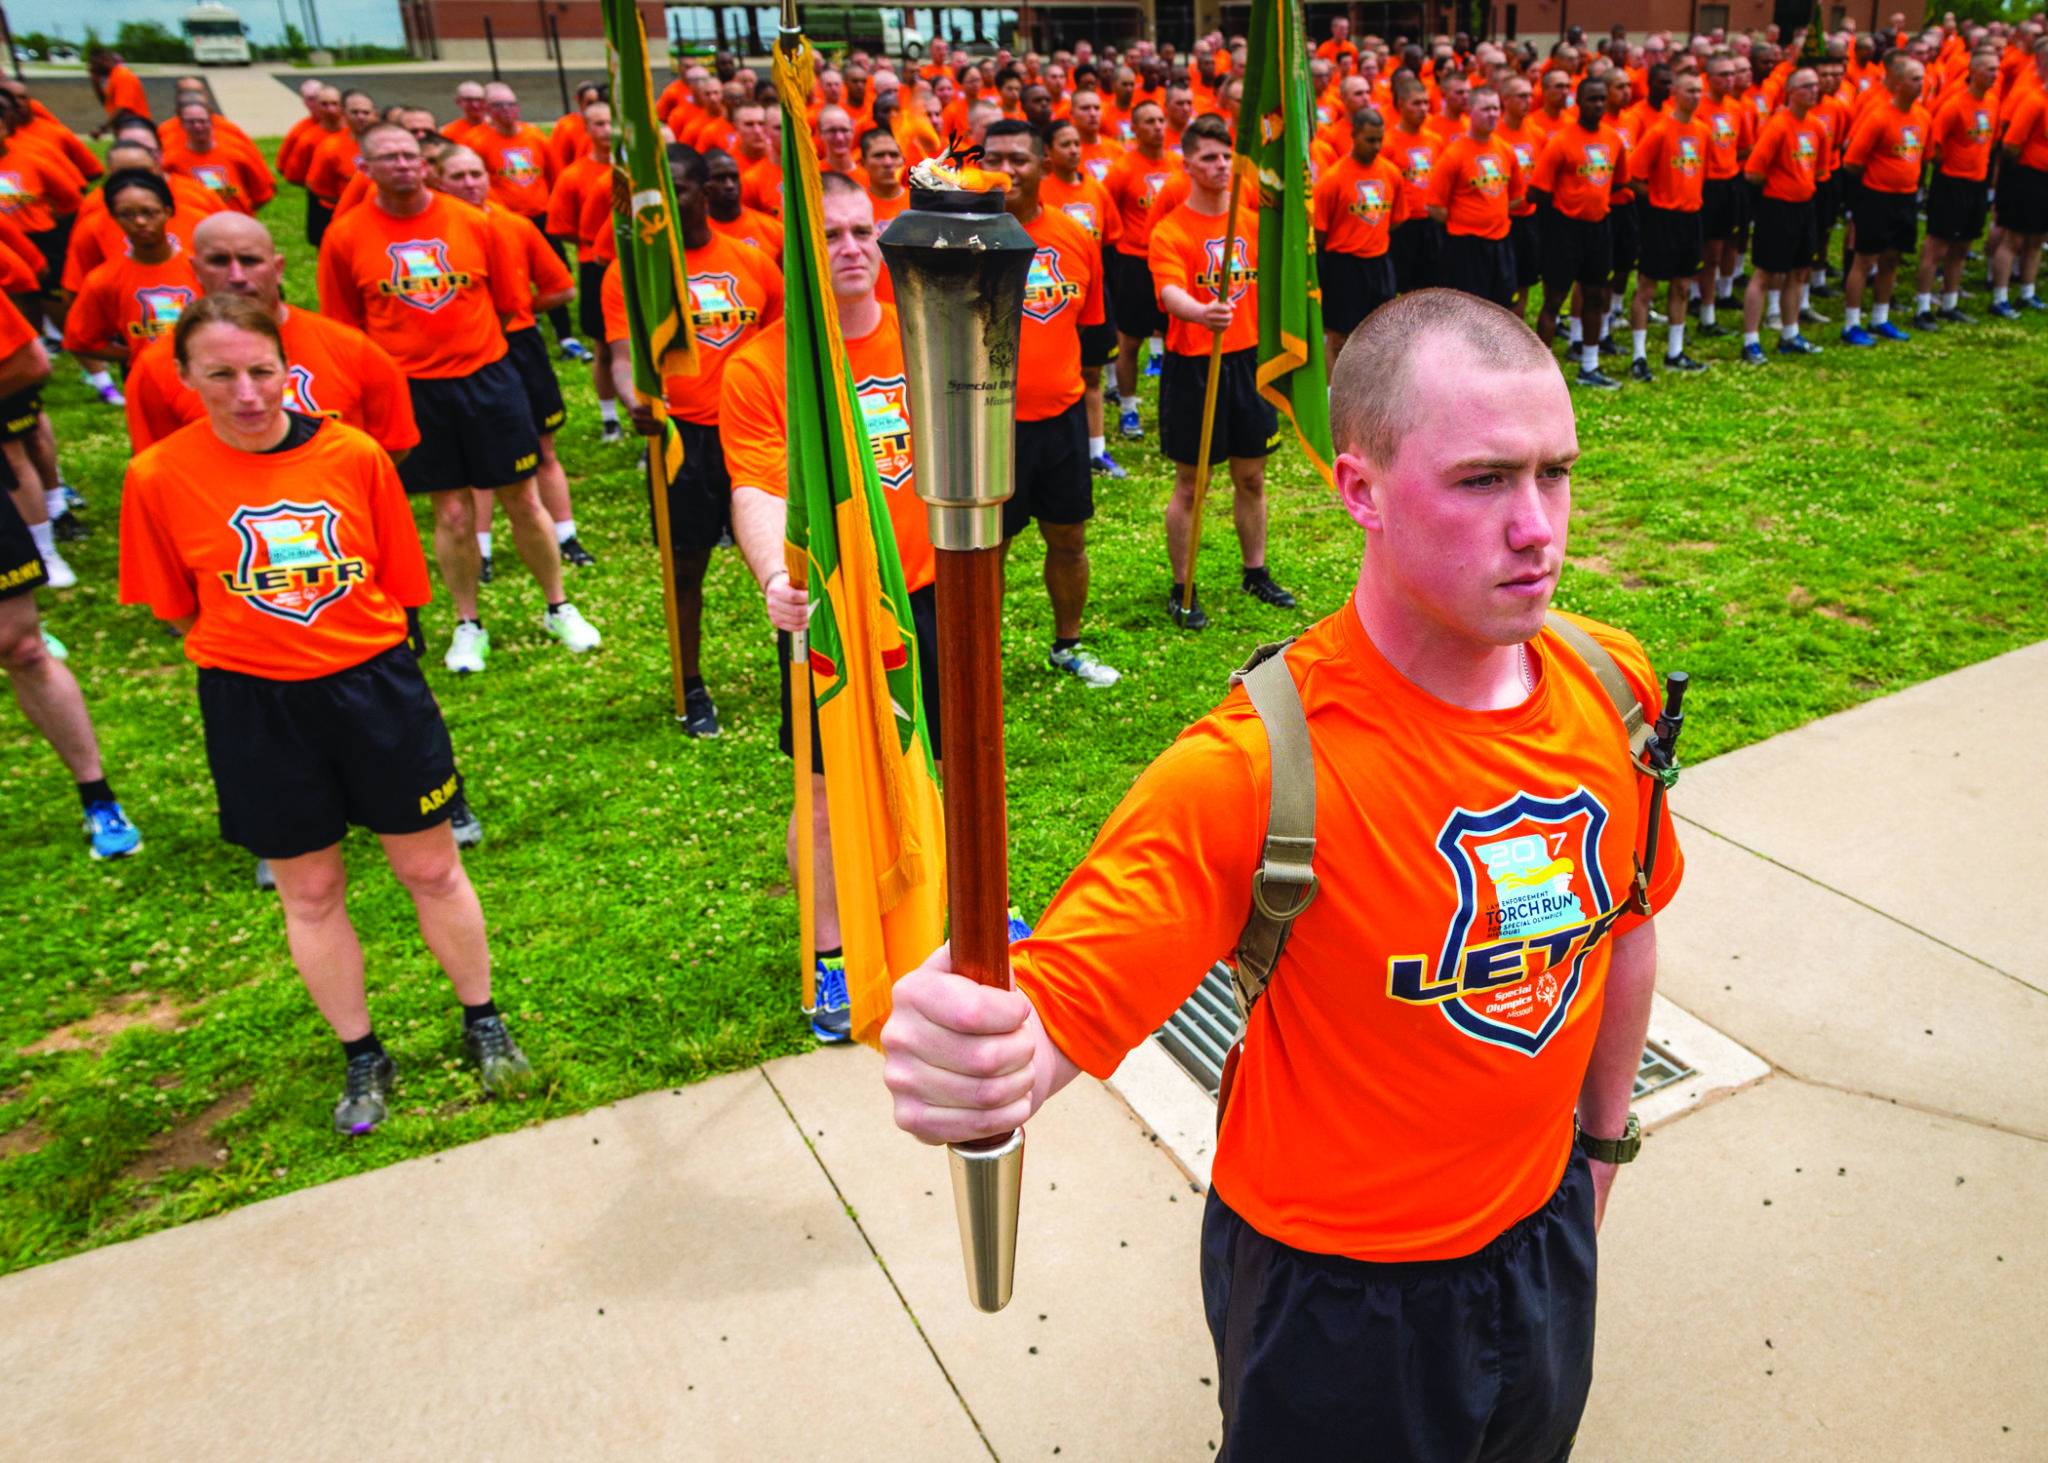 A person in an orange LETR shirt holds a lit torch with more than a hundred standing at attention behind them